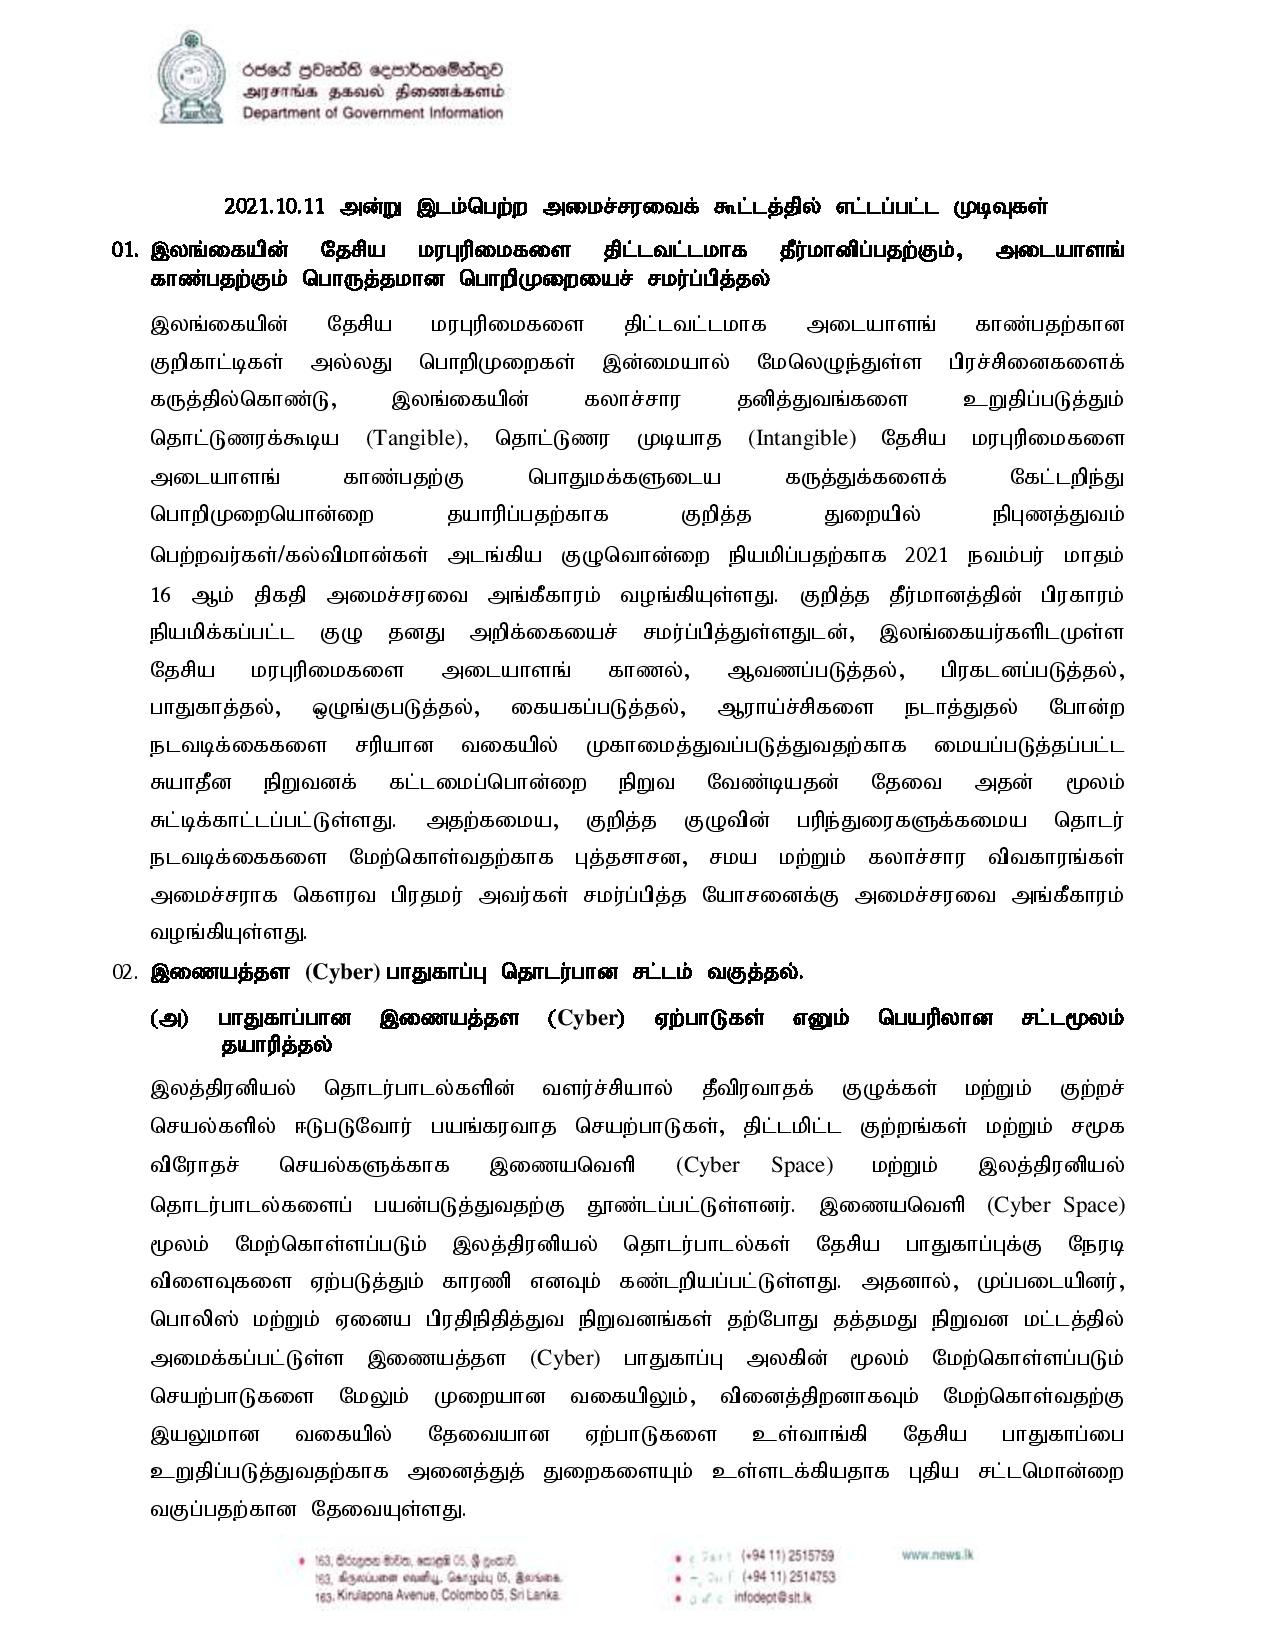 Cabinet Decisions on 11.10.2021 T page 001